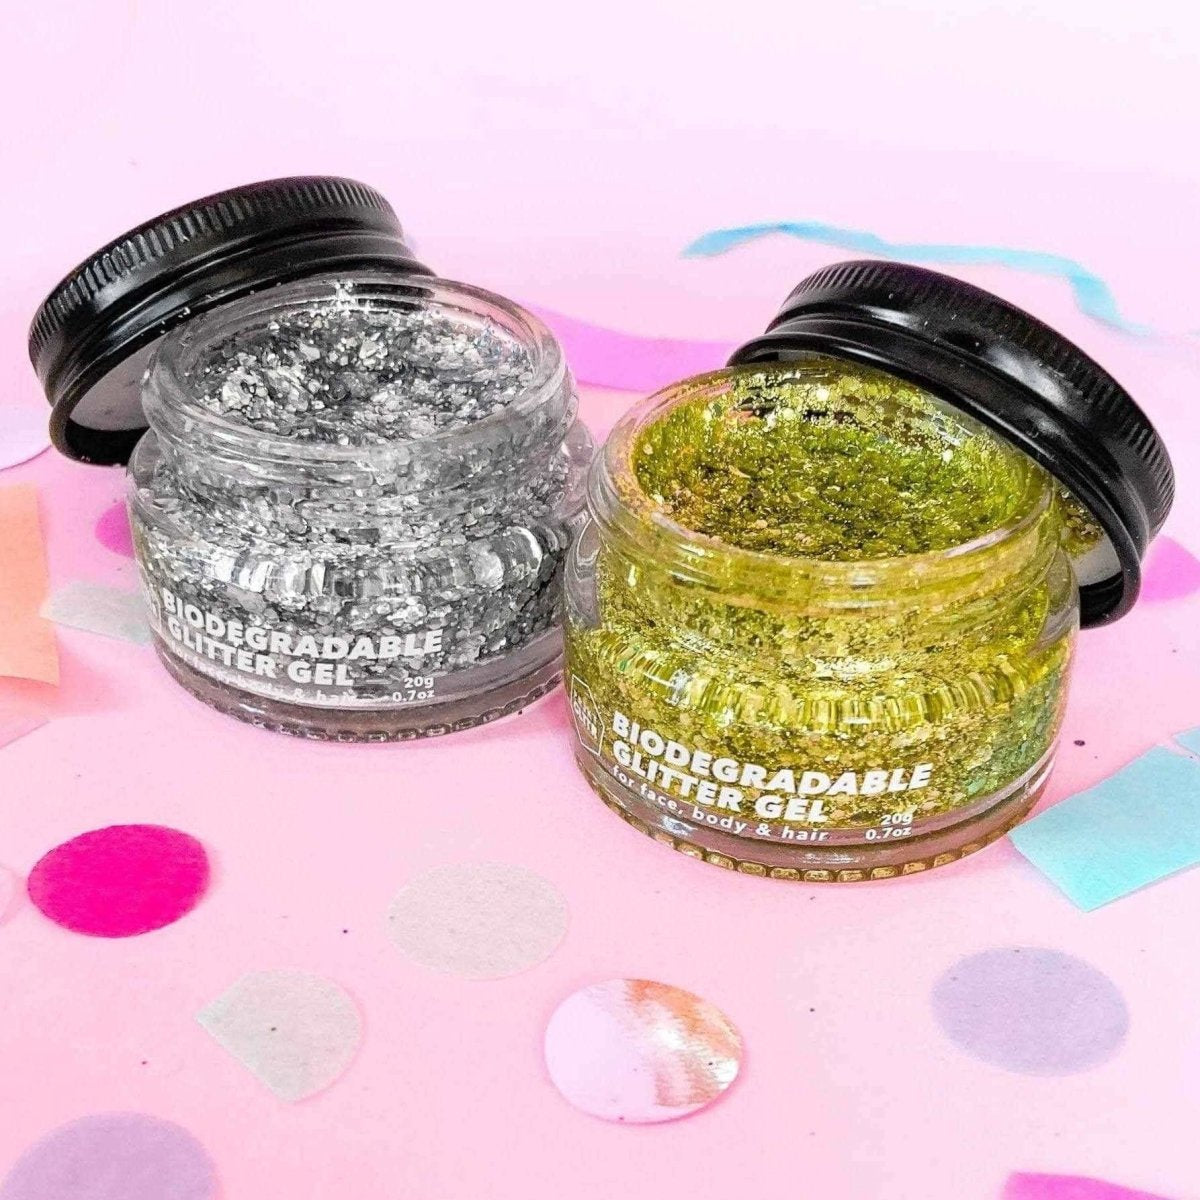 Best biodegradable glitter and why you should buy it